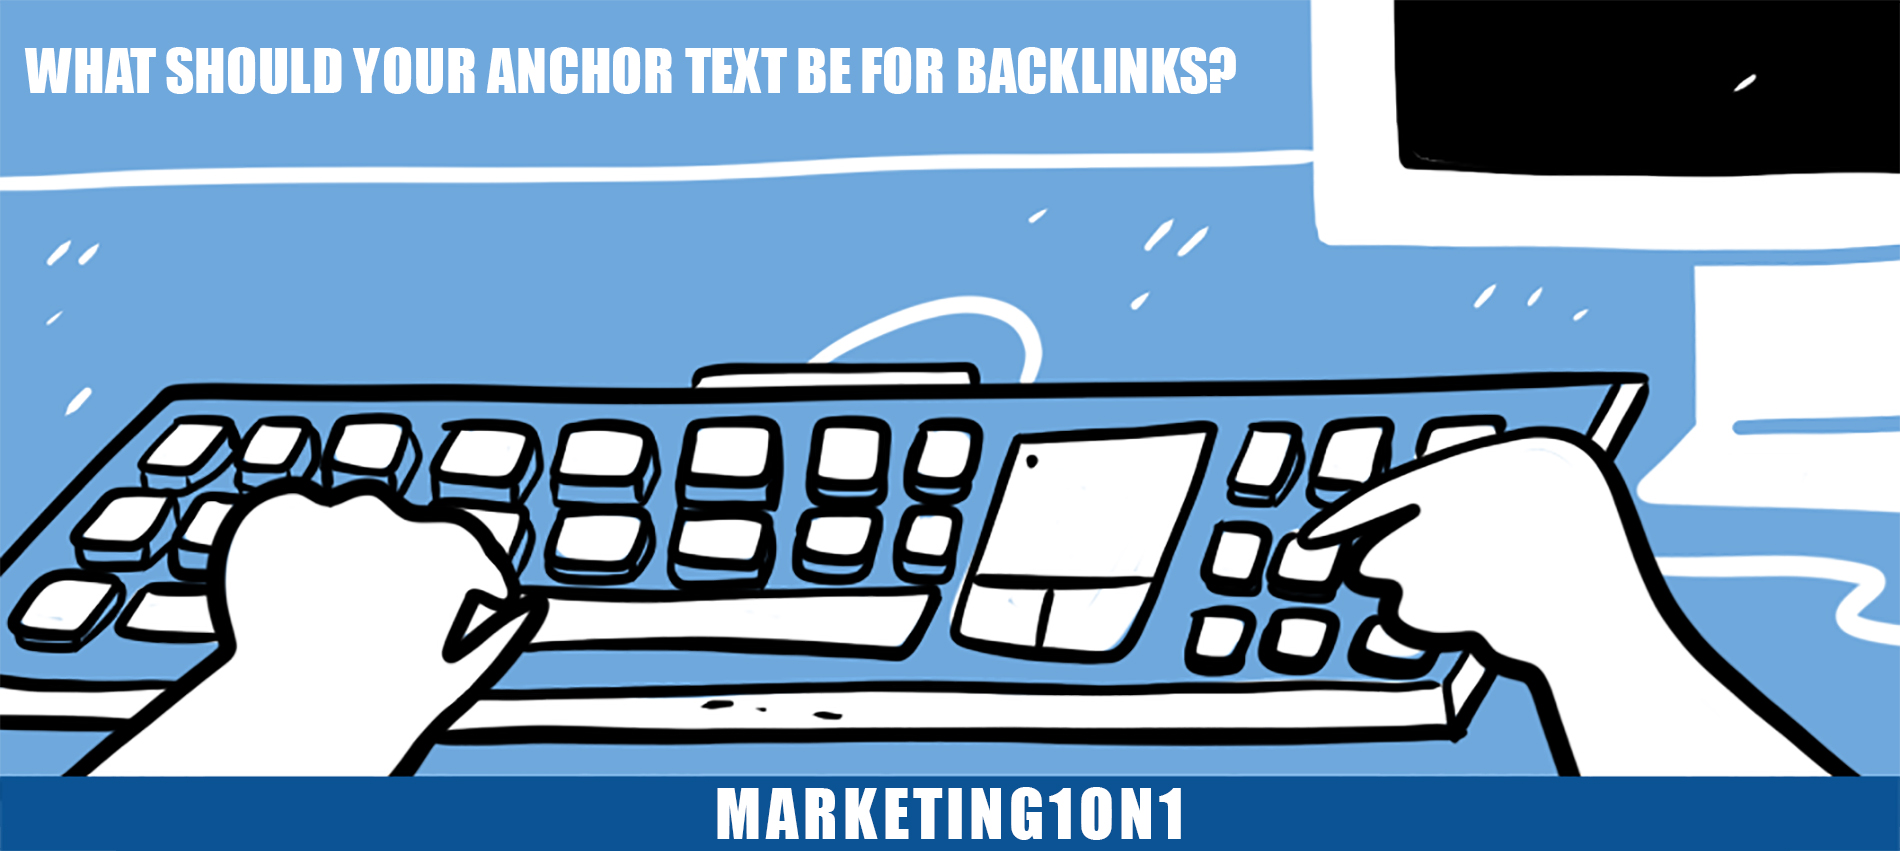 What should your anchor text be for backlinks?